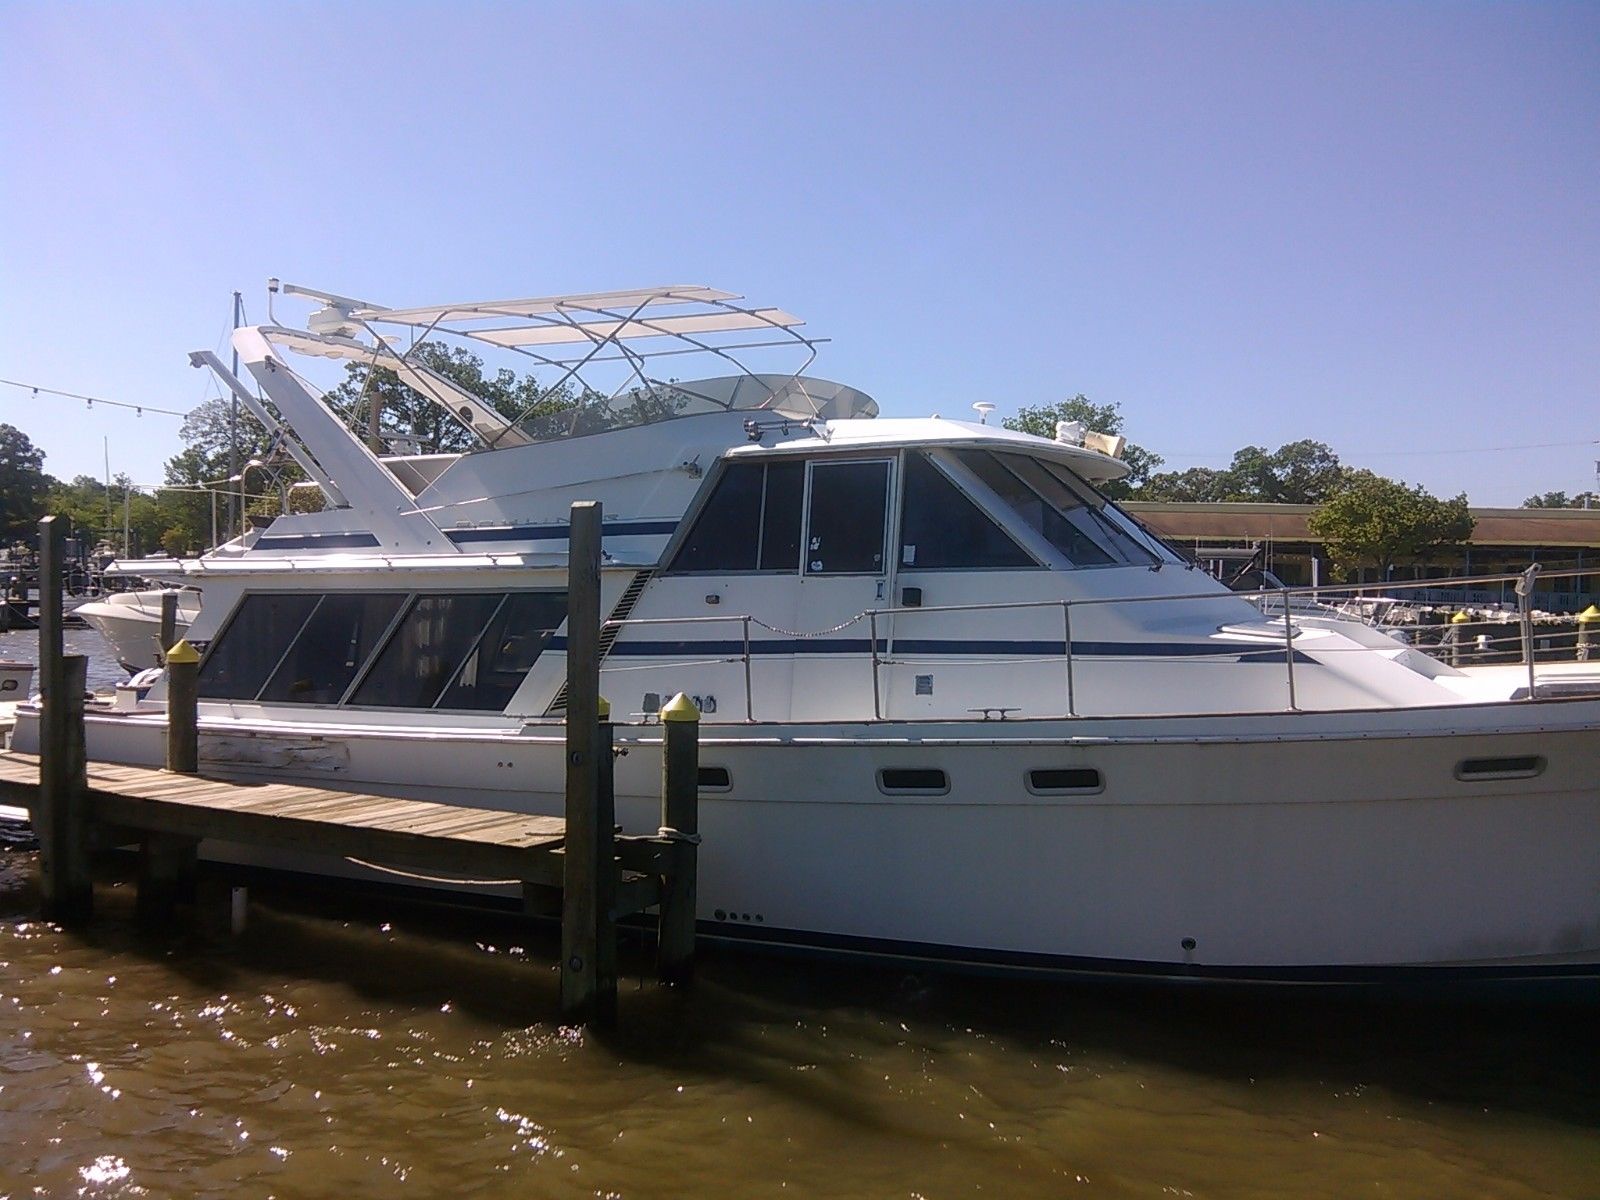 45 ft motor yachts for sale